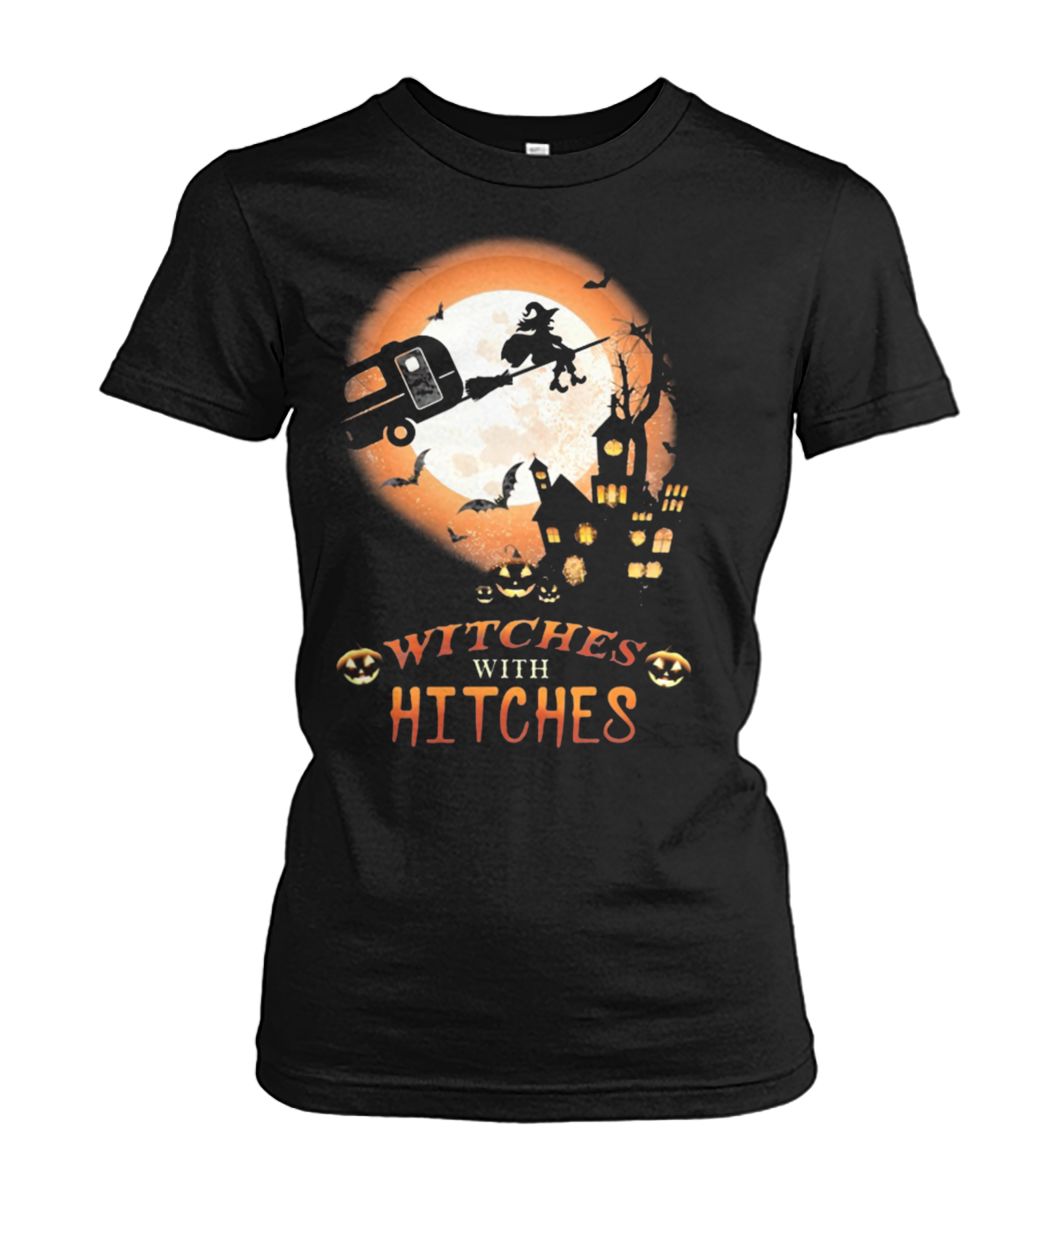 Witches with hitches halloween women's crew tee